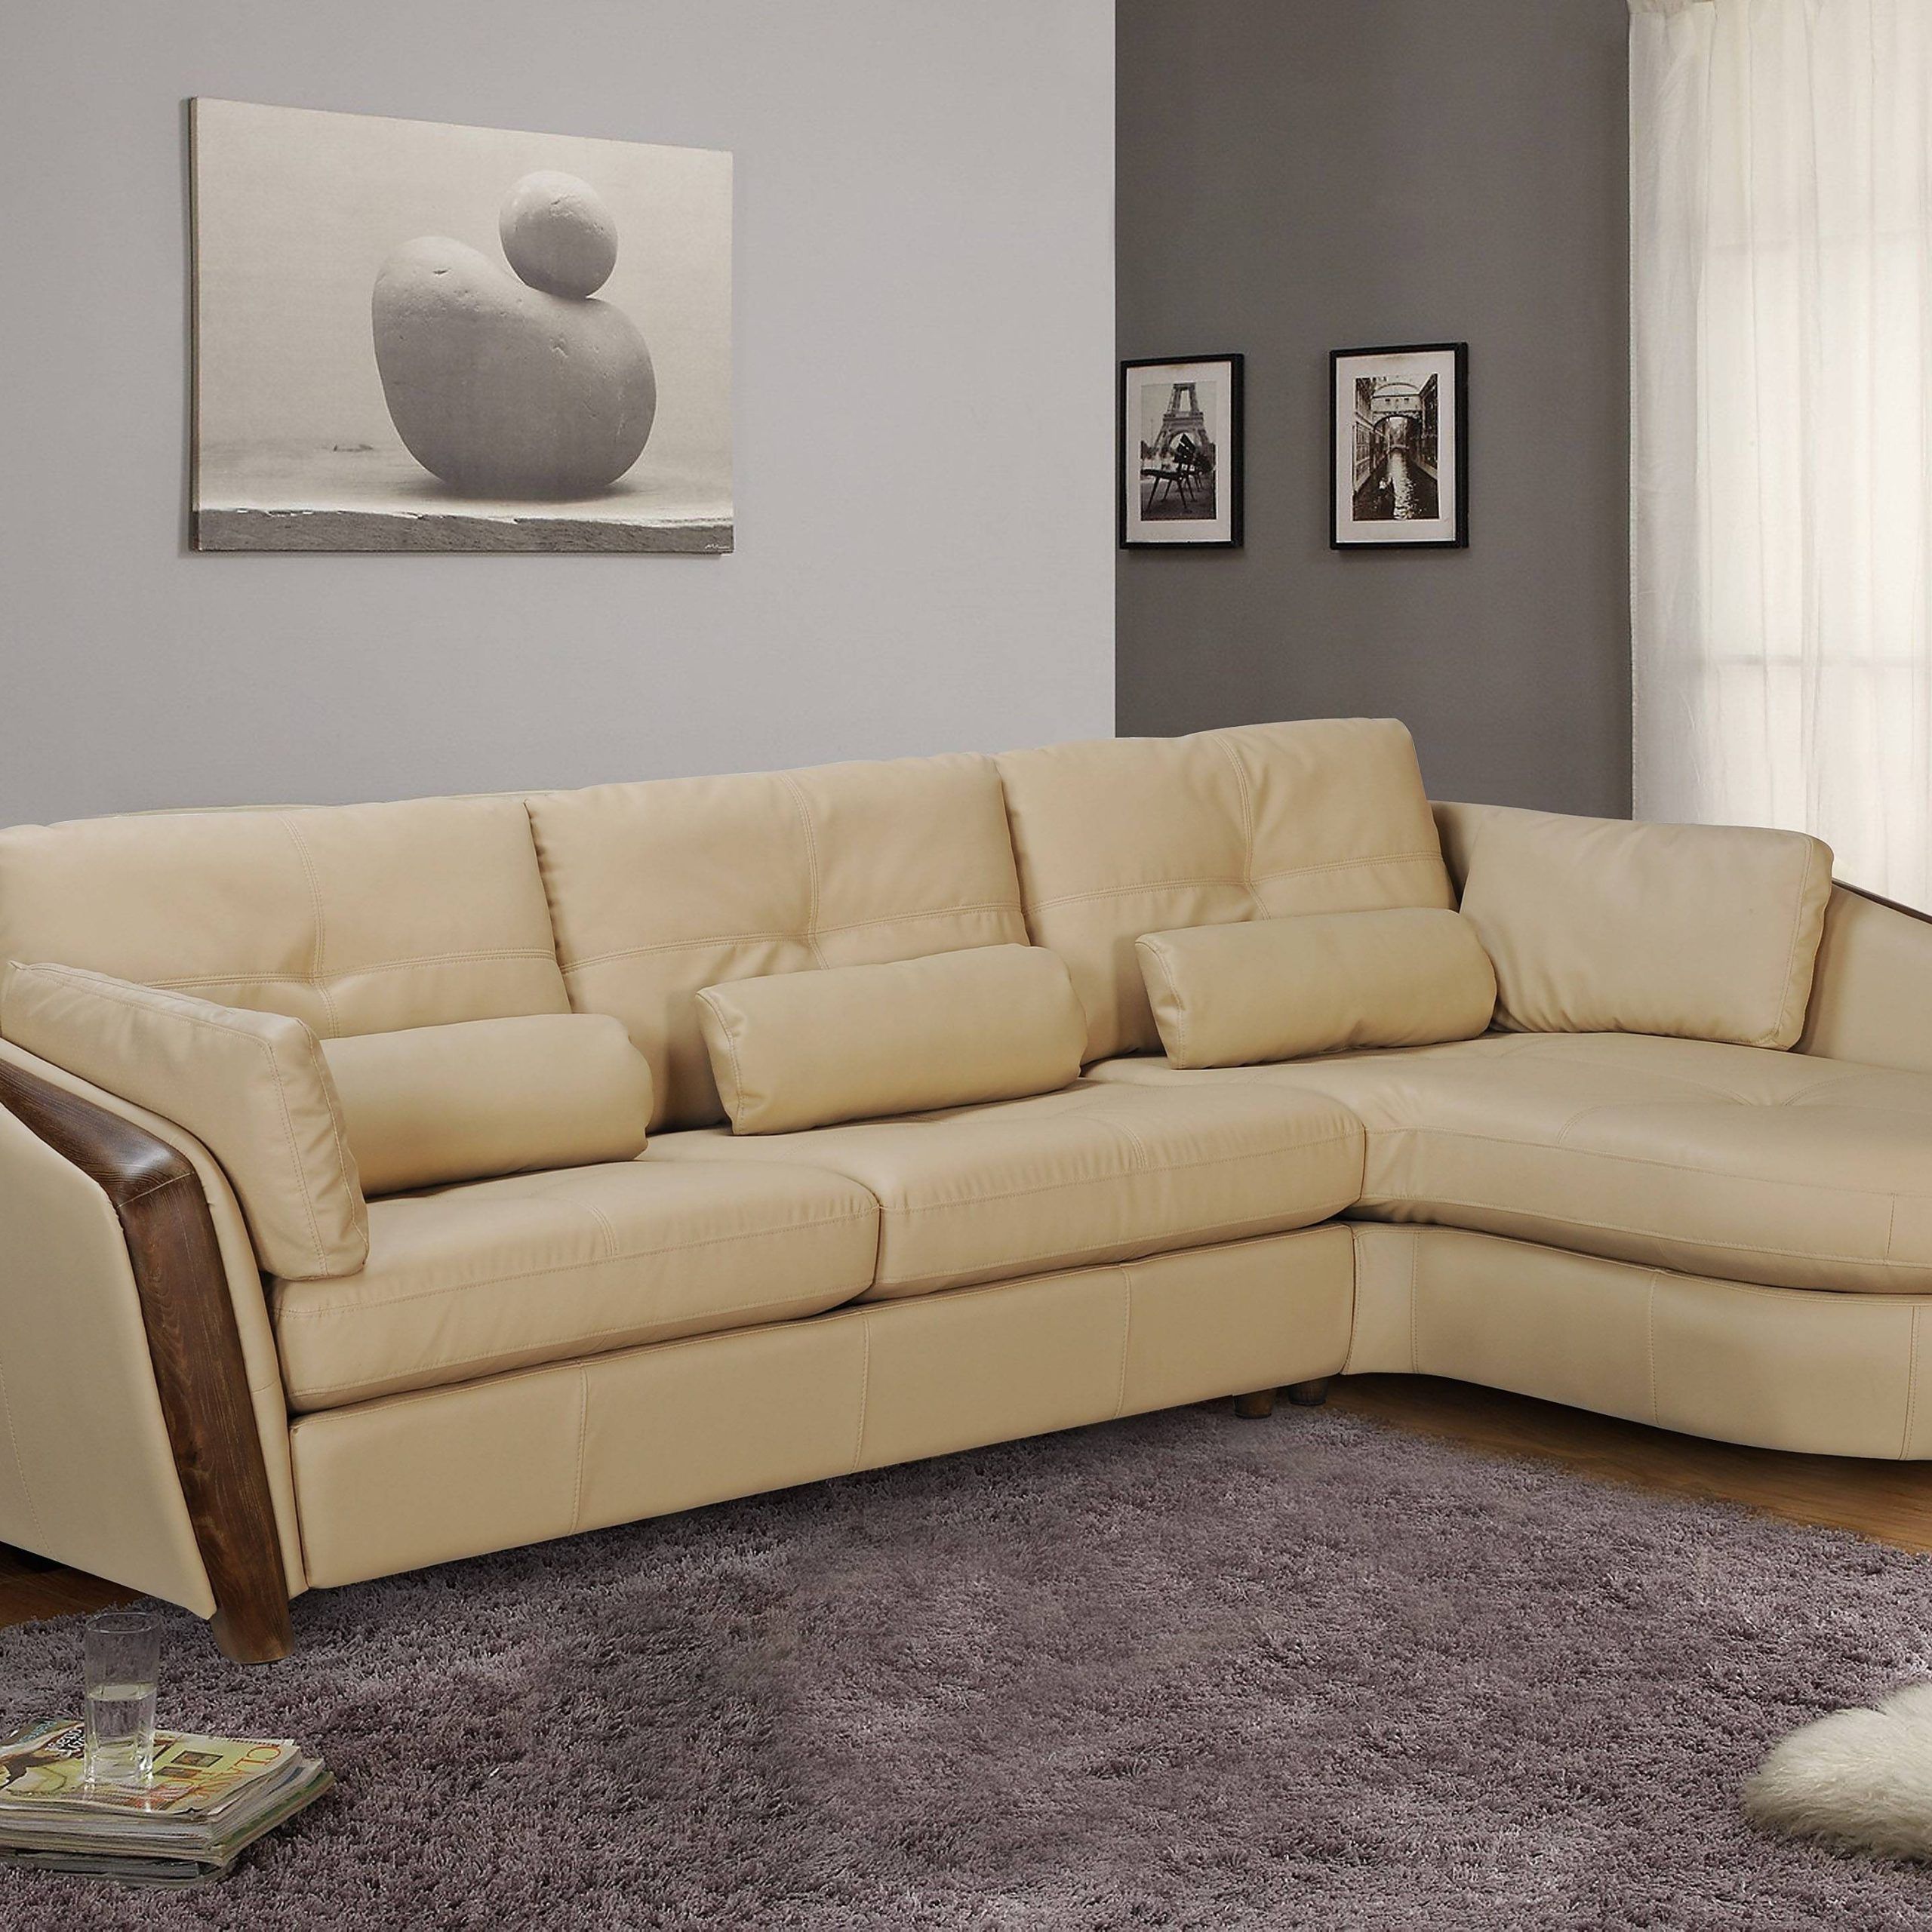 Taupe Bonded Leather Sectional Sofa With Ash Wood Accent Baltimore Maryland  Chont Within 3 Piece Leather Sectional Sofa Sets (Photo 6 of 15)